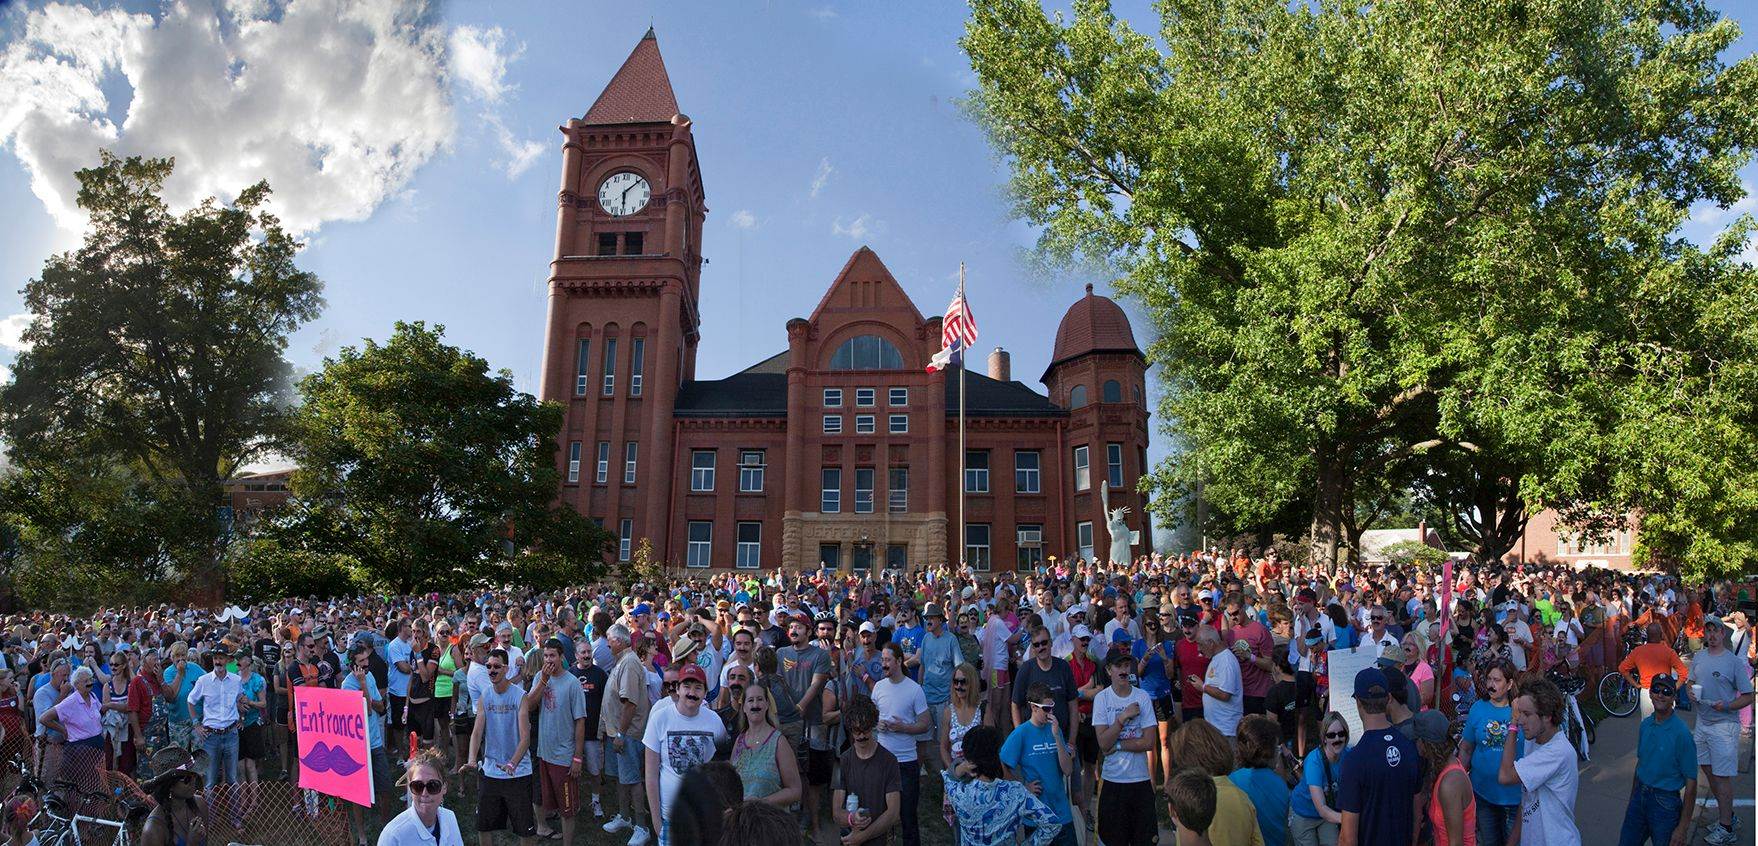 RAGBRAI 2015 at the Courthouse